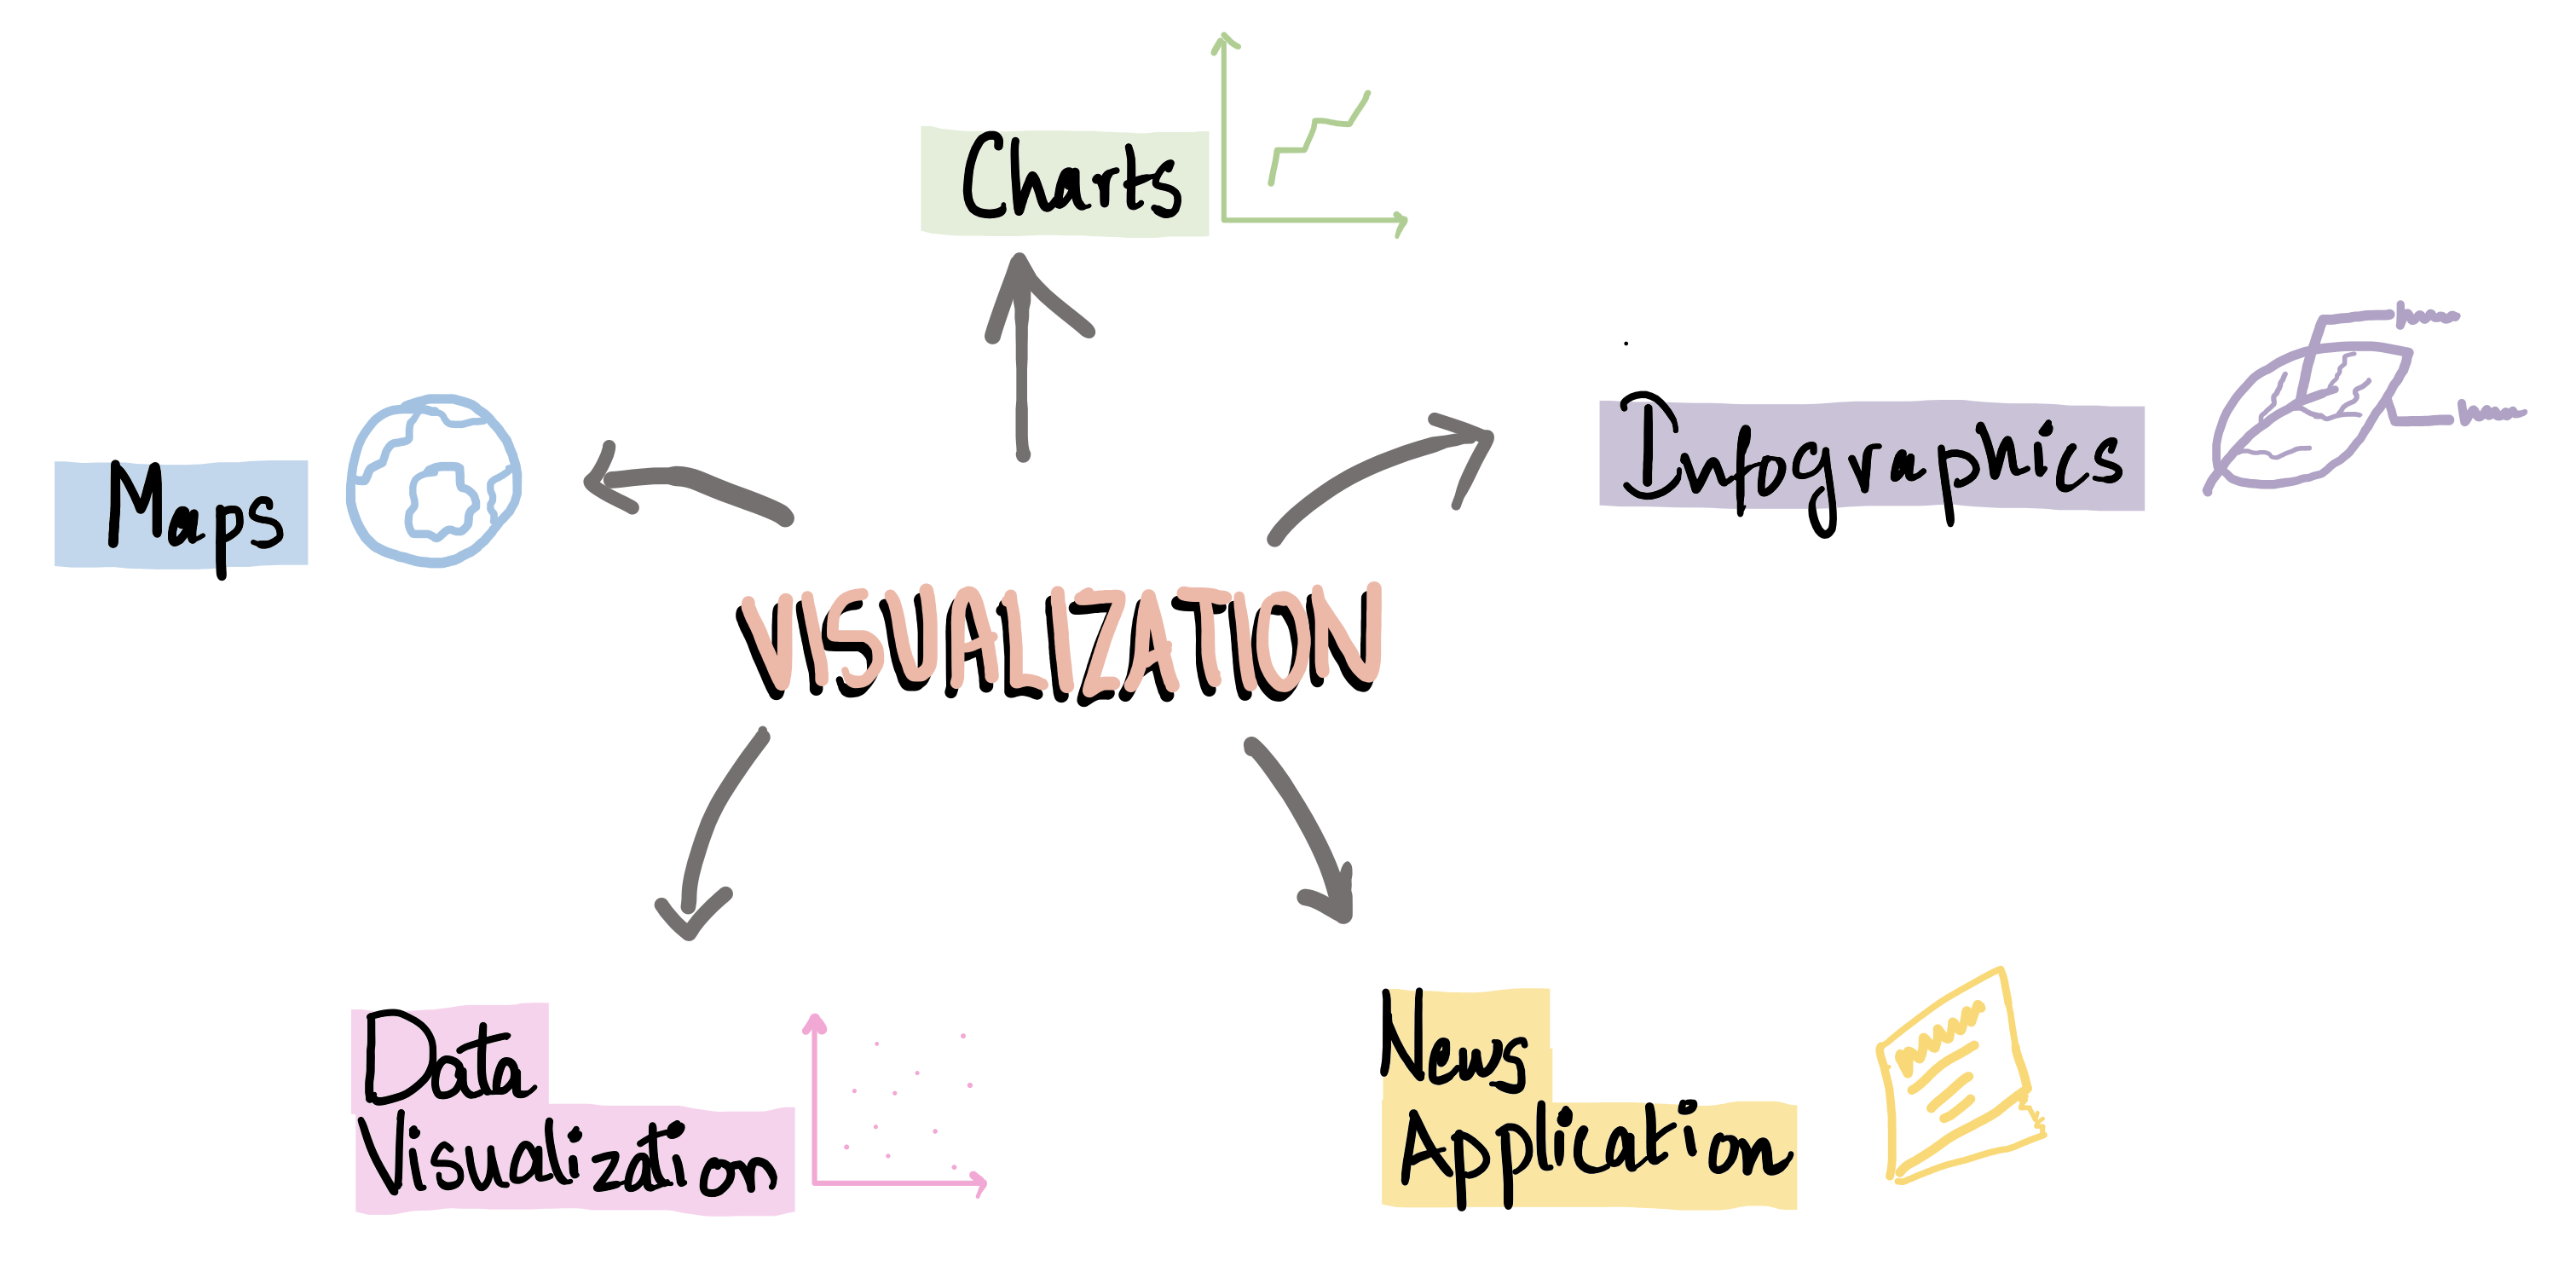 Visualization split into charts, maps, infographics, news application and data visualization, the boundaries are not strict